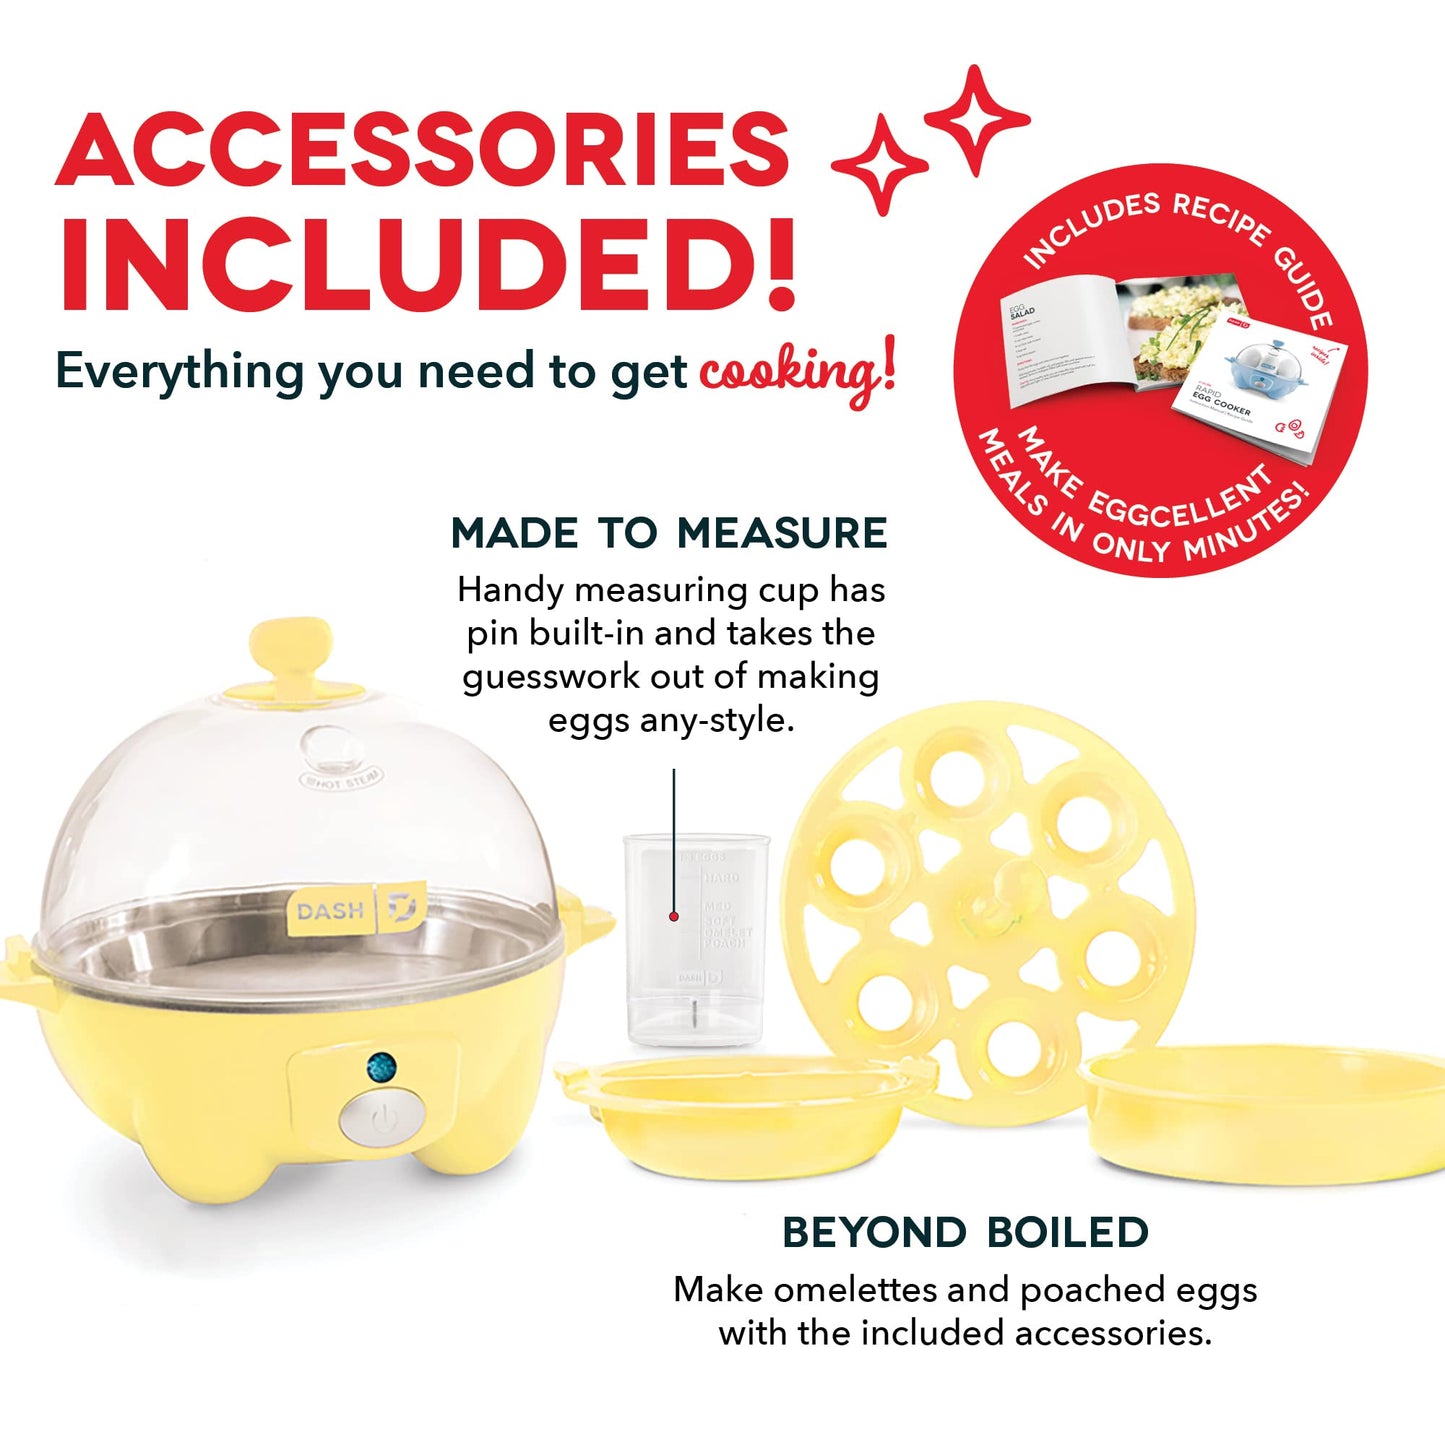 DASH Rapid Egg Cooker: 6 Egg Capacity Electric Egg Cooker for Hard Boiled Eggs, Poached Eggs, Scrambled Eggs, or Omelets with Auto Shut Off Feature - Yellow